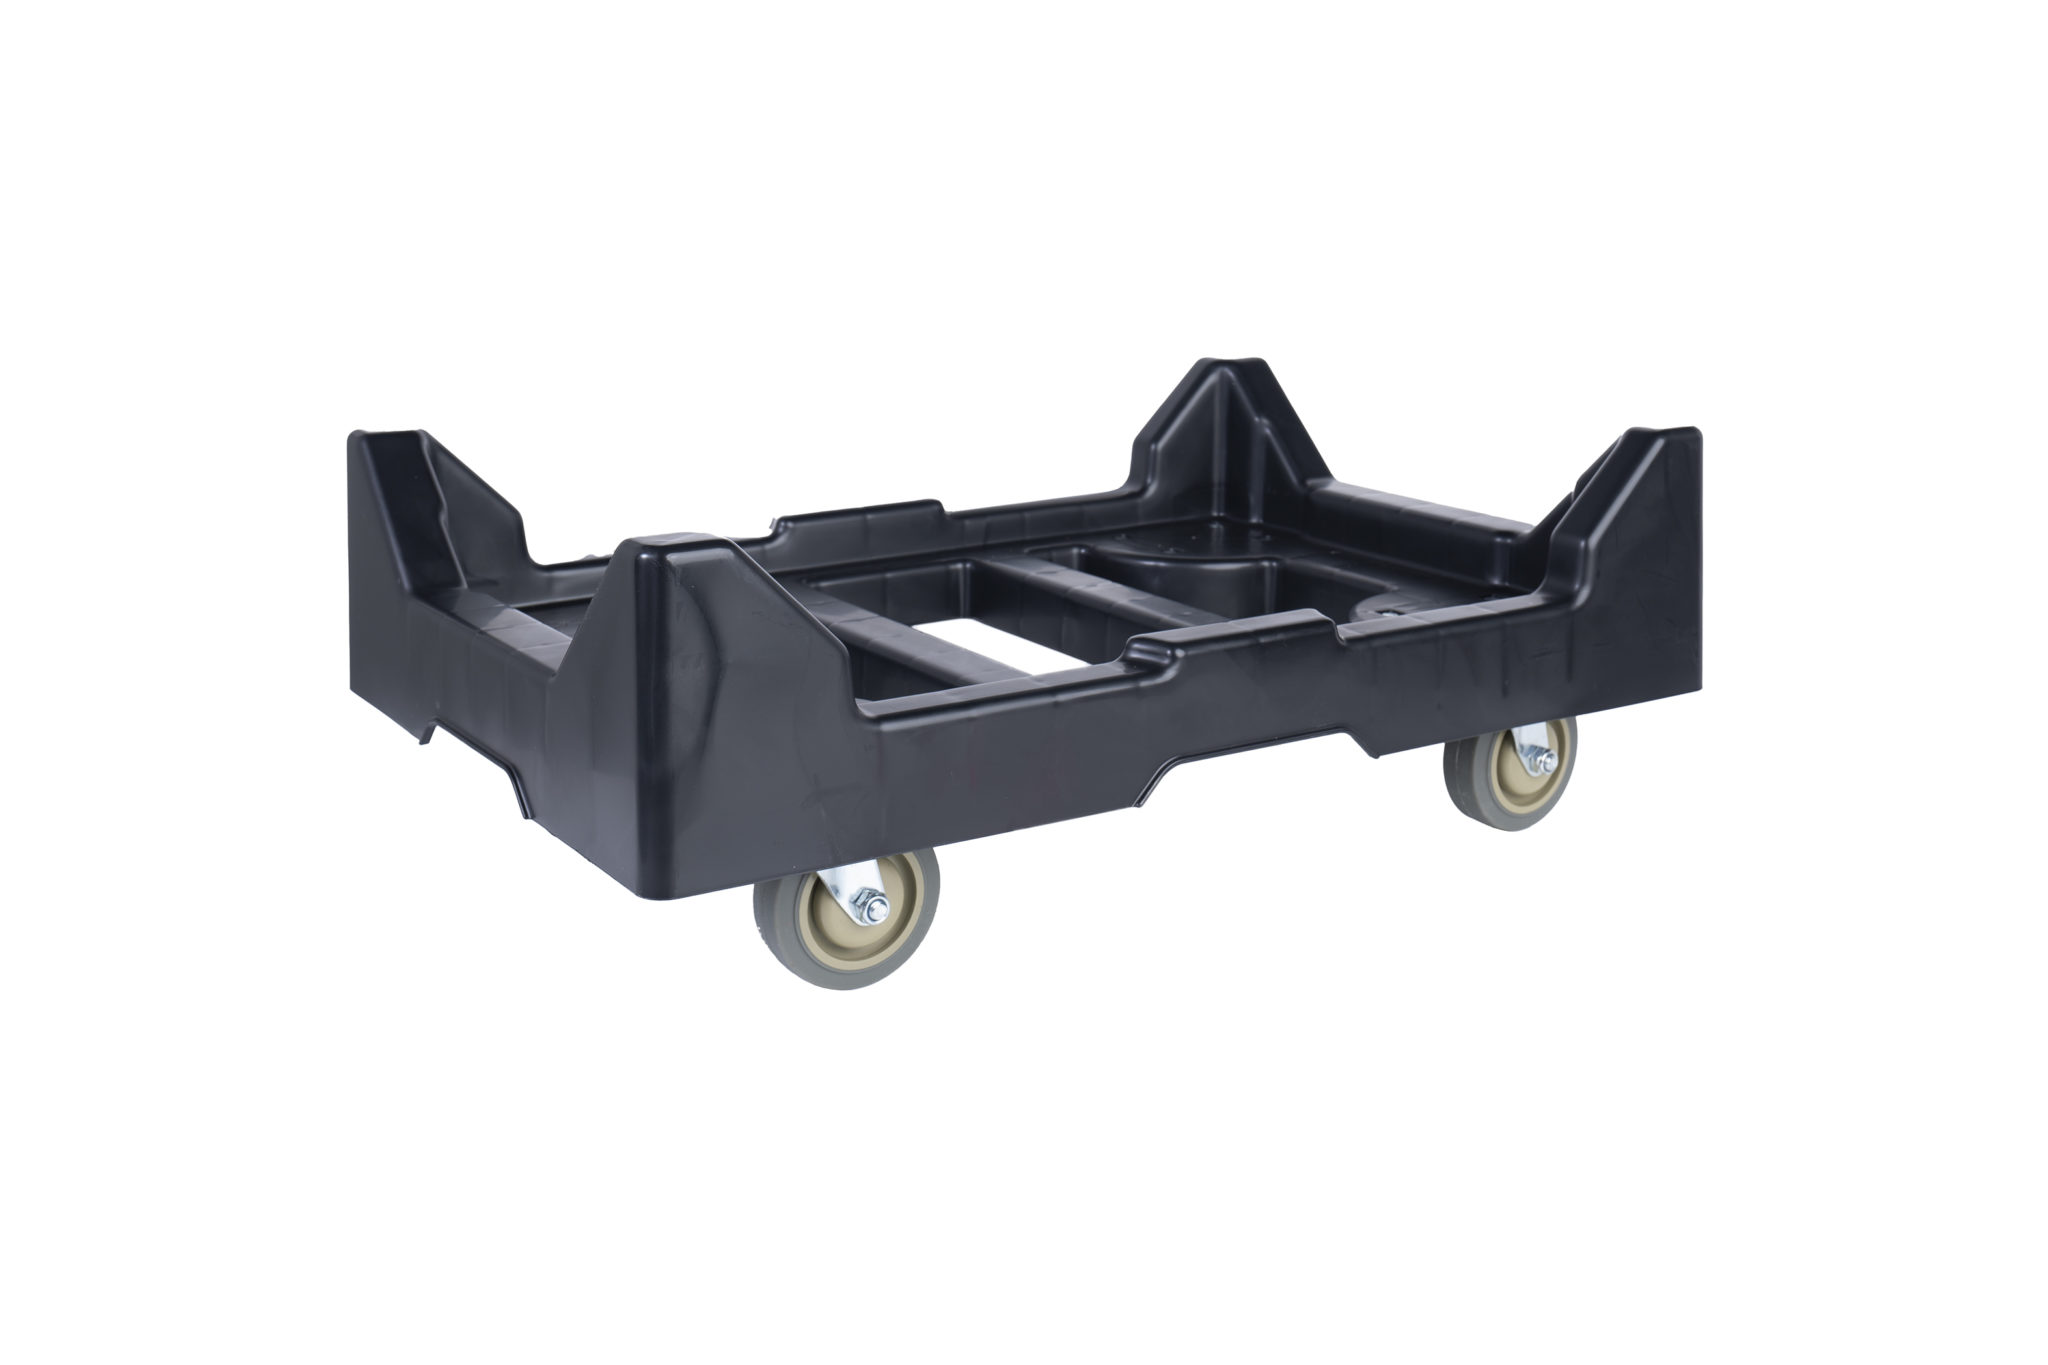 27 x 17 x 12 – Handheld Attached Lid Tote Dolly